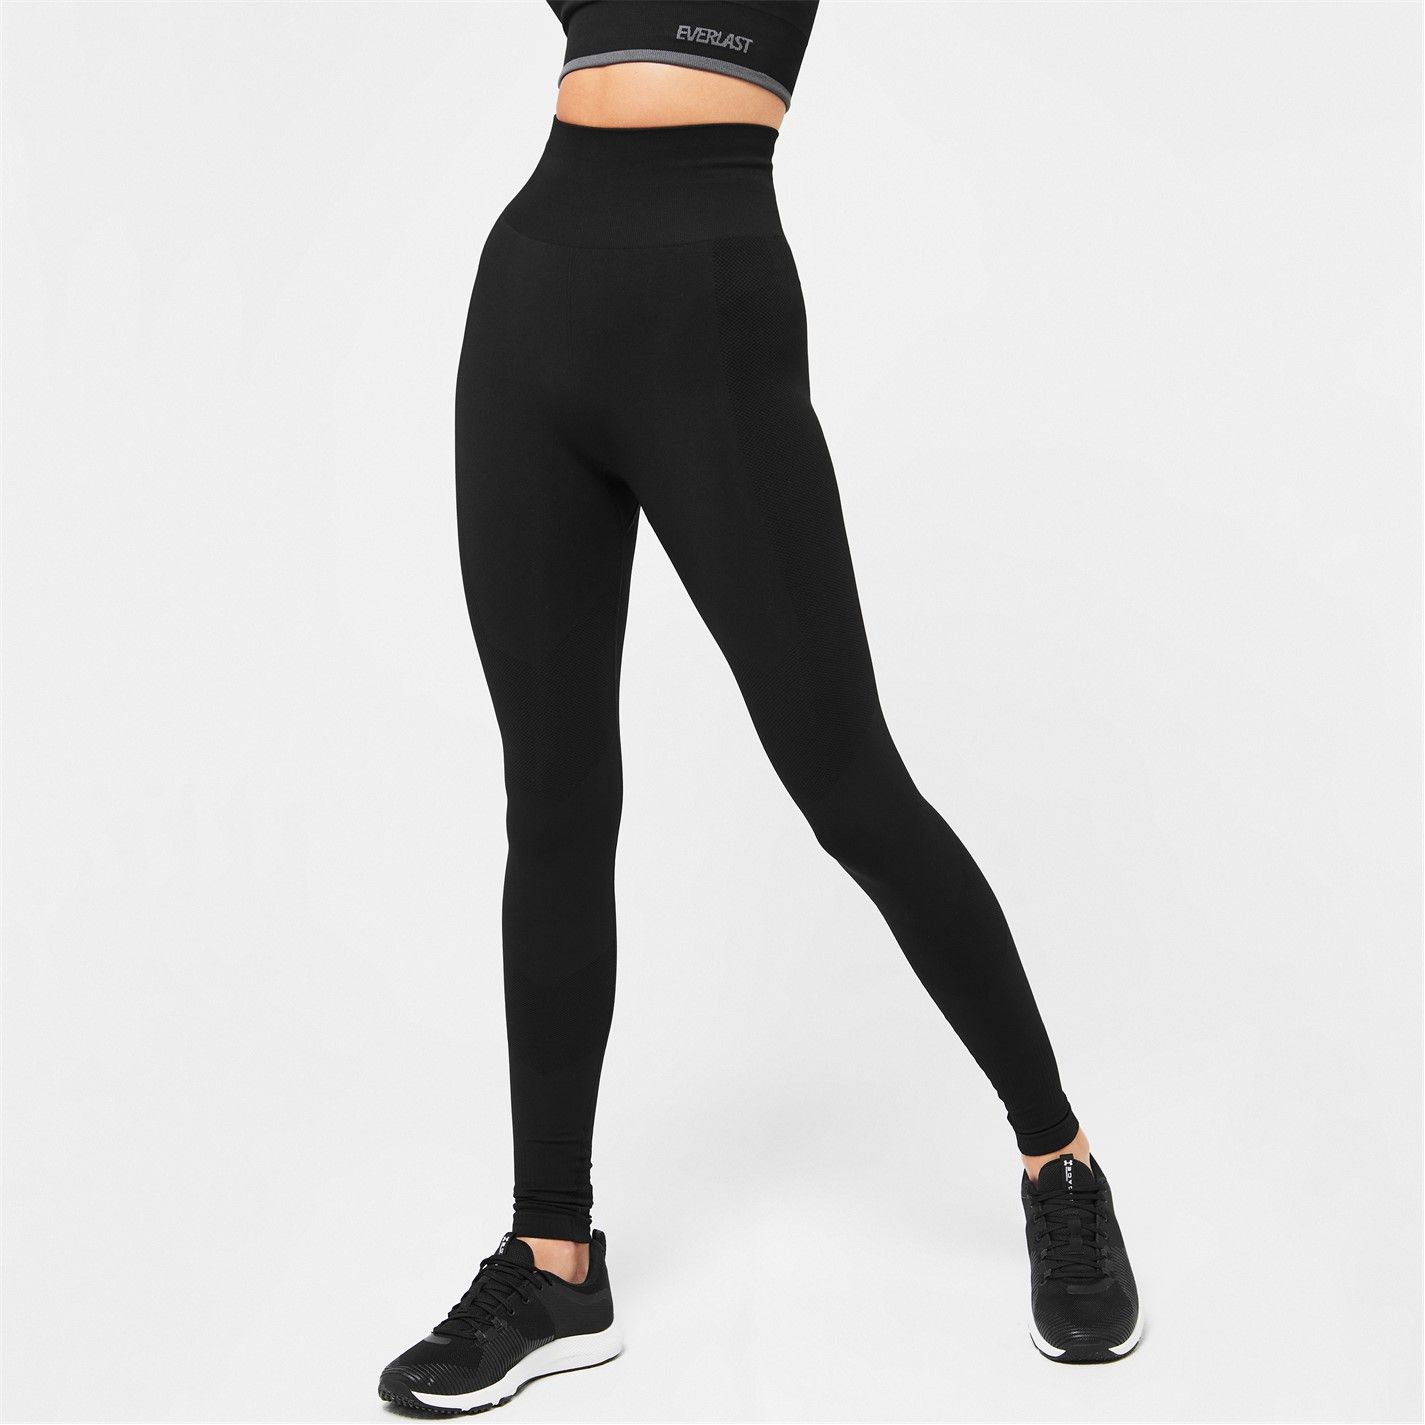 Everlast Super High Waisted Racer Leggings Feel flexible, comfortable and supported with these Everlast super-high waisted racer leggings. Equipped with our signature seamless technology, these leggings are fully flexible allowing for ultimate mobility and movement. Plus the sweat wicking technology will keep you dry during your workout, in a squat proof design. These are a slim fit, flattering any figure this season.  >High rise  >Seamless  >Sweat wicking  >Slim fit  >Squat proof  >Original 90% Nylon 10% Elastane  >New style: 92% Nylon 8% Elastane  >Machine washable